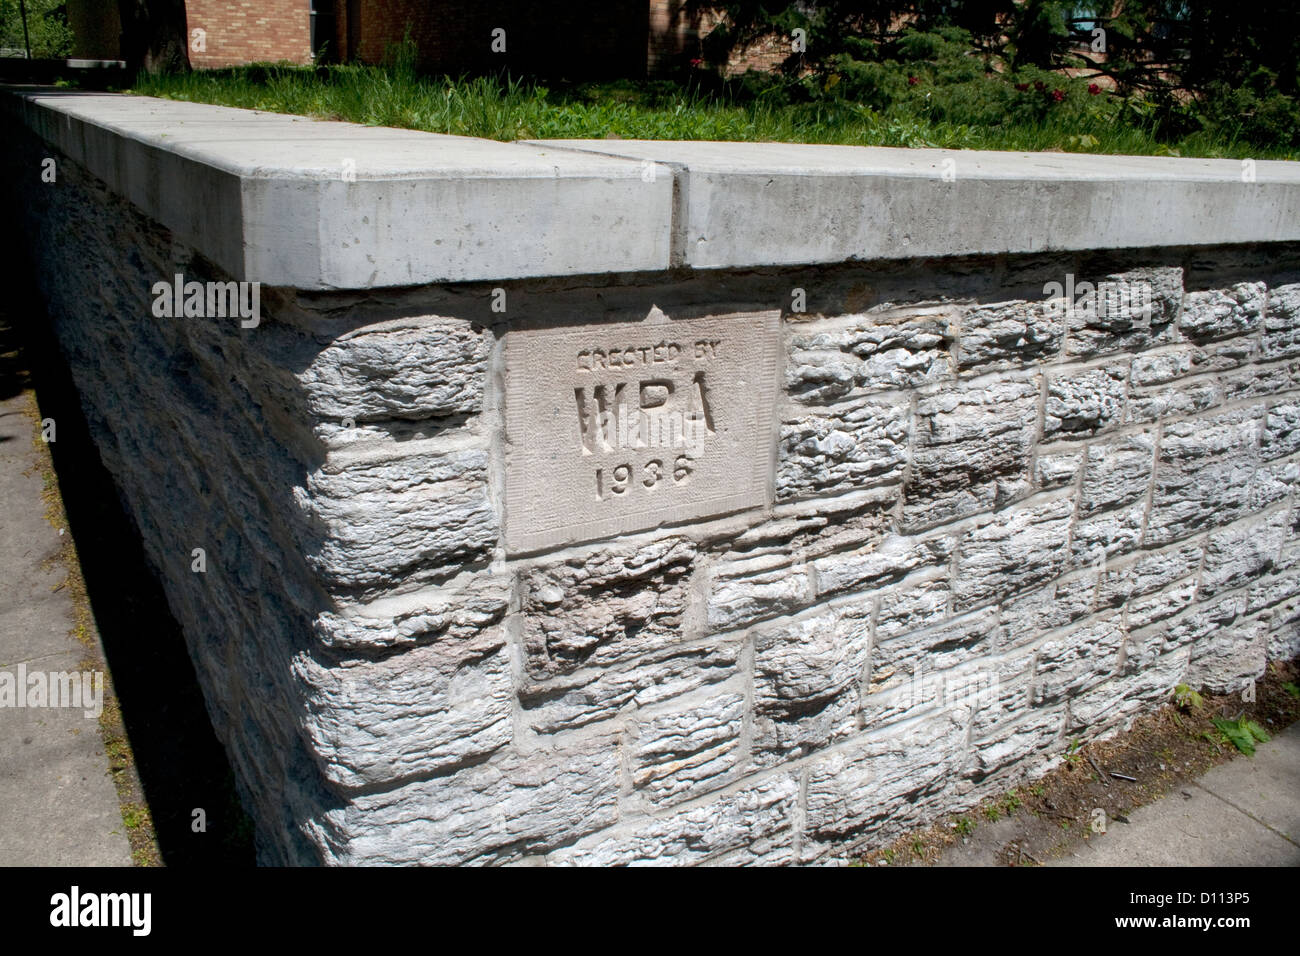 WPA Works Project Administration 1936 sign on brick wall outside of Horace Mann Elementary School. St Paul Minnesota MN USA Stock Photo